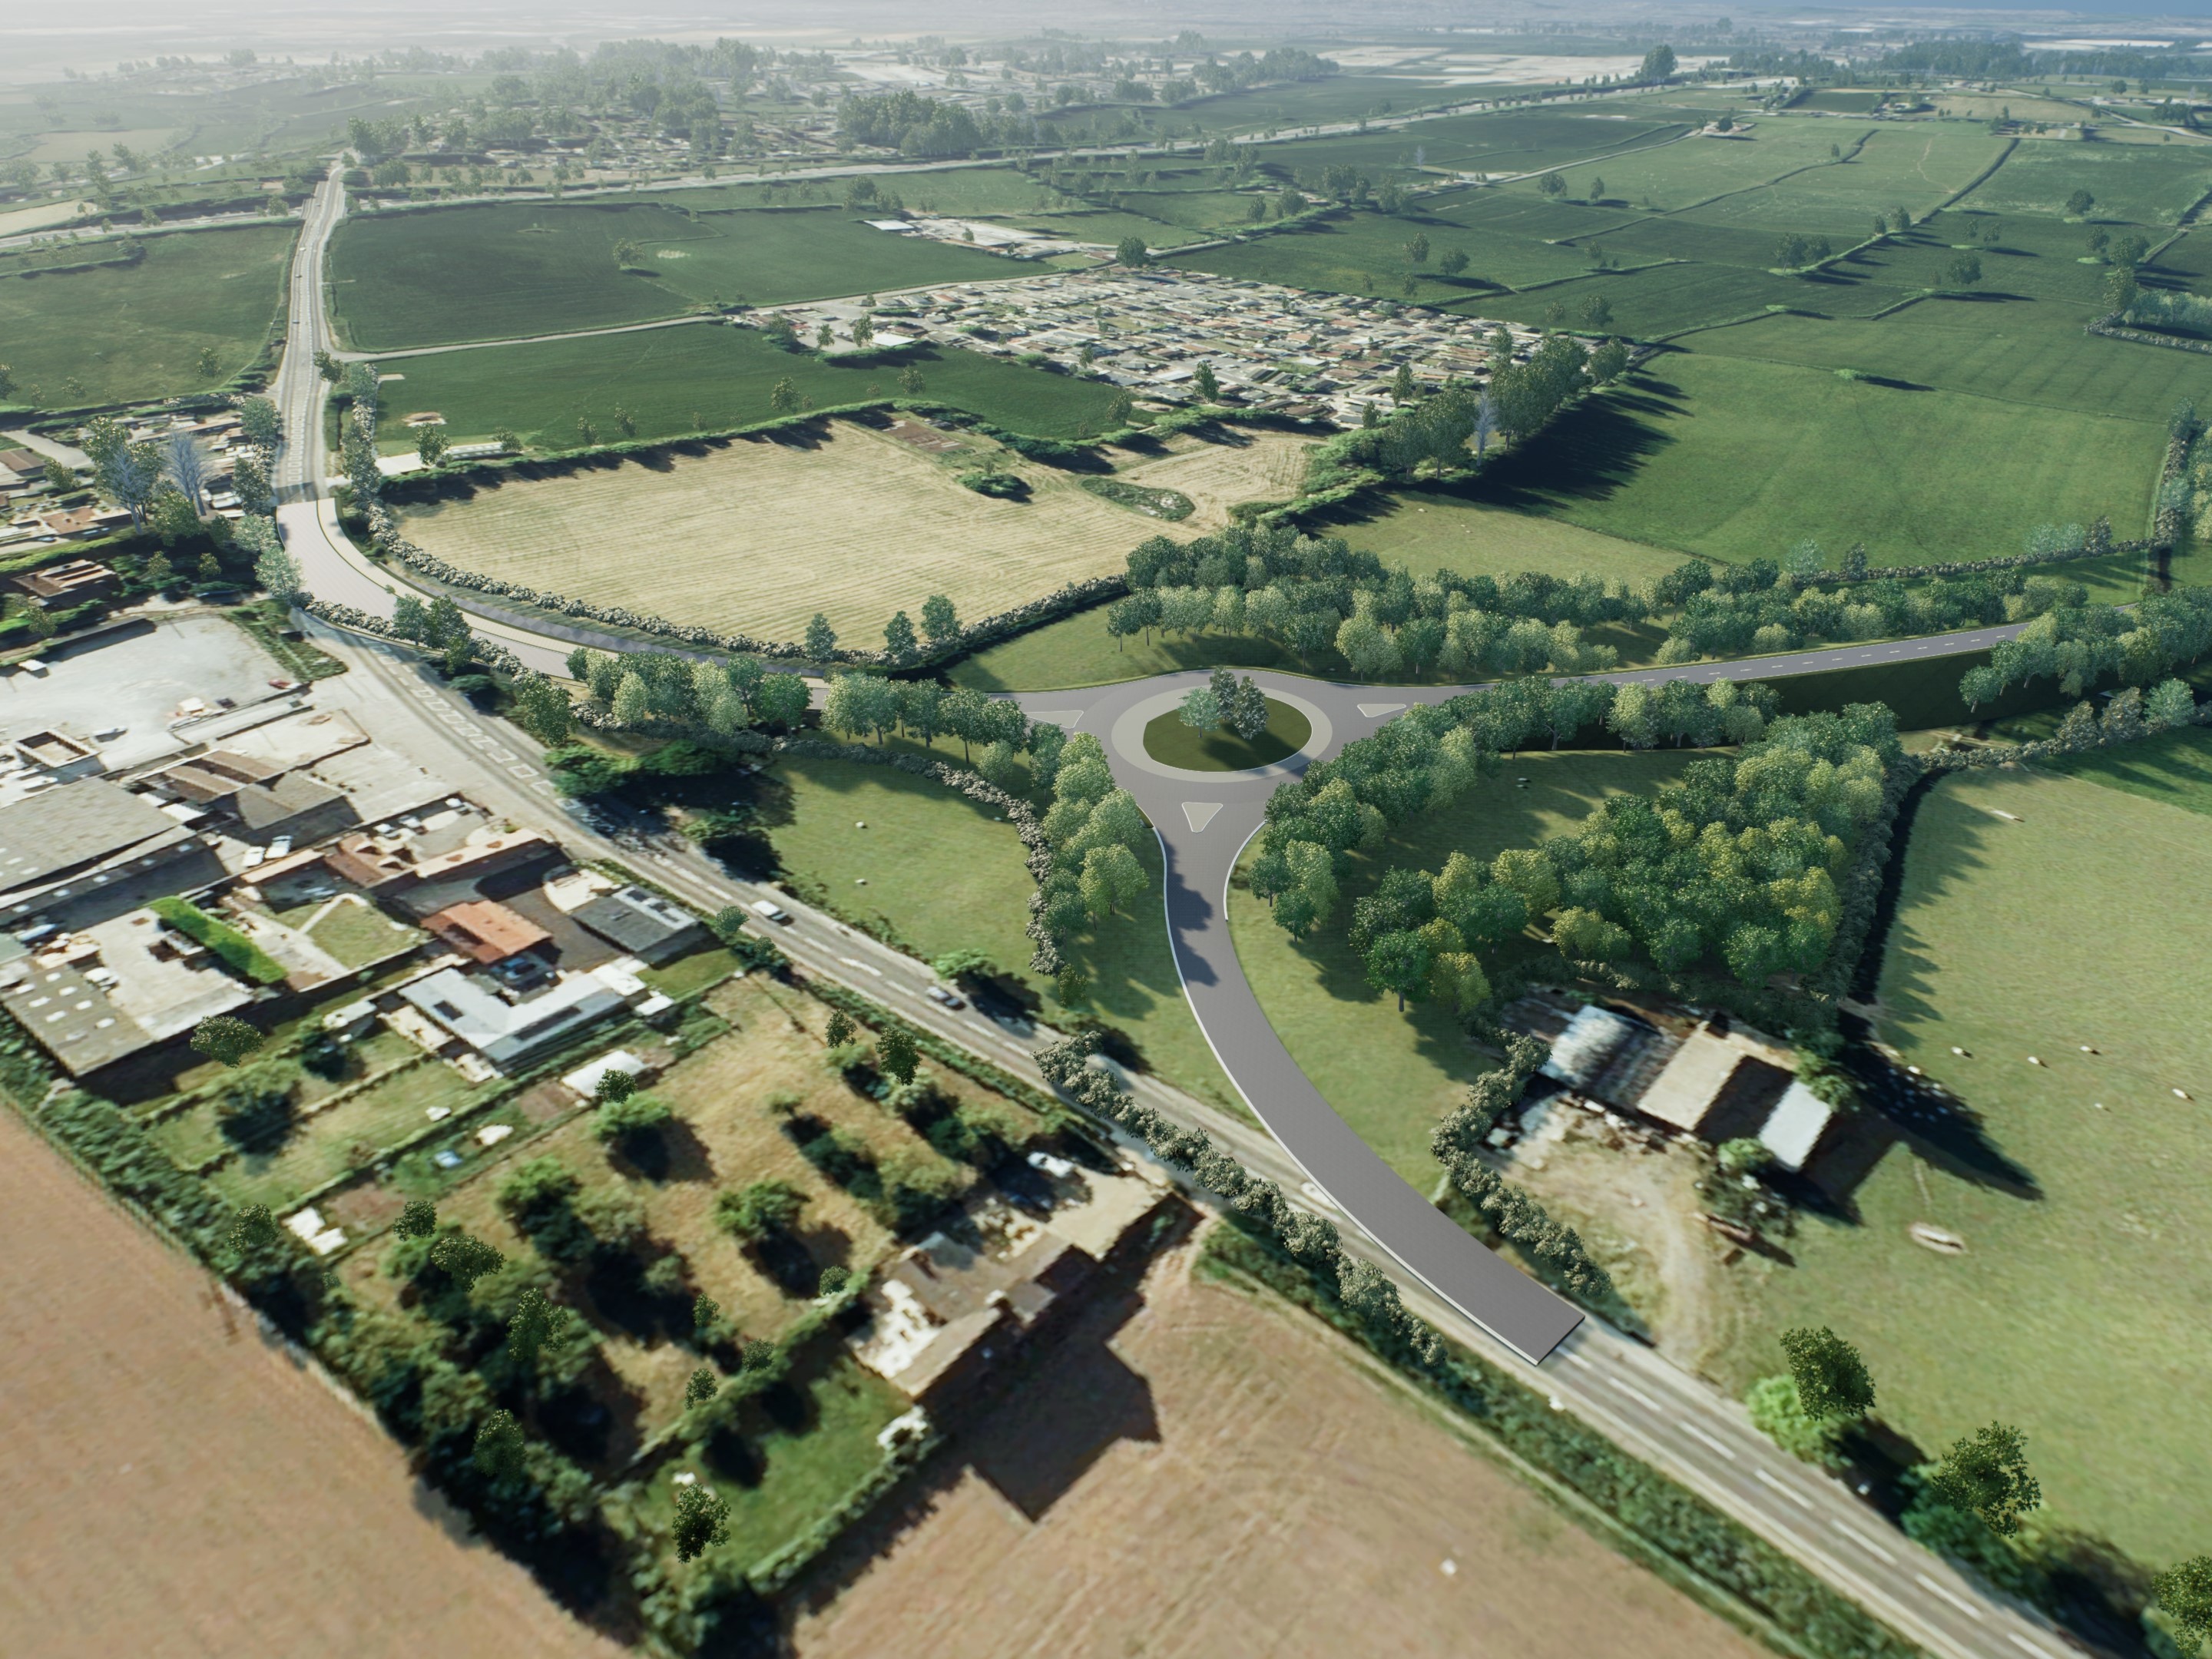 Council looks to secure additional £11.9m for Banwell bypass